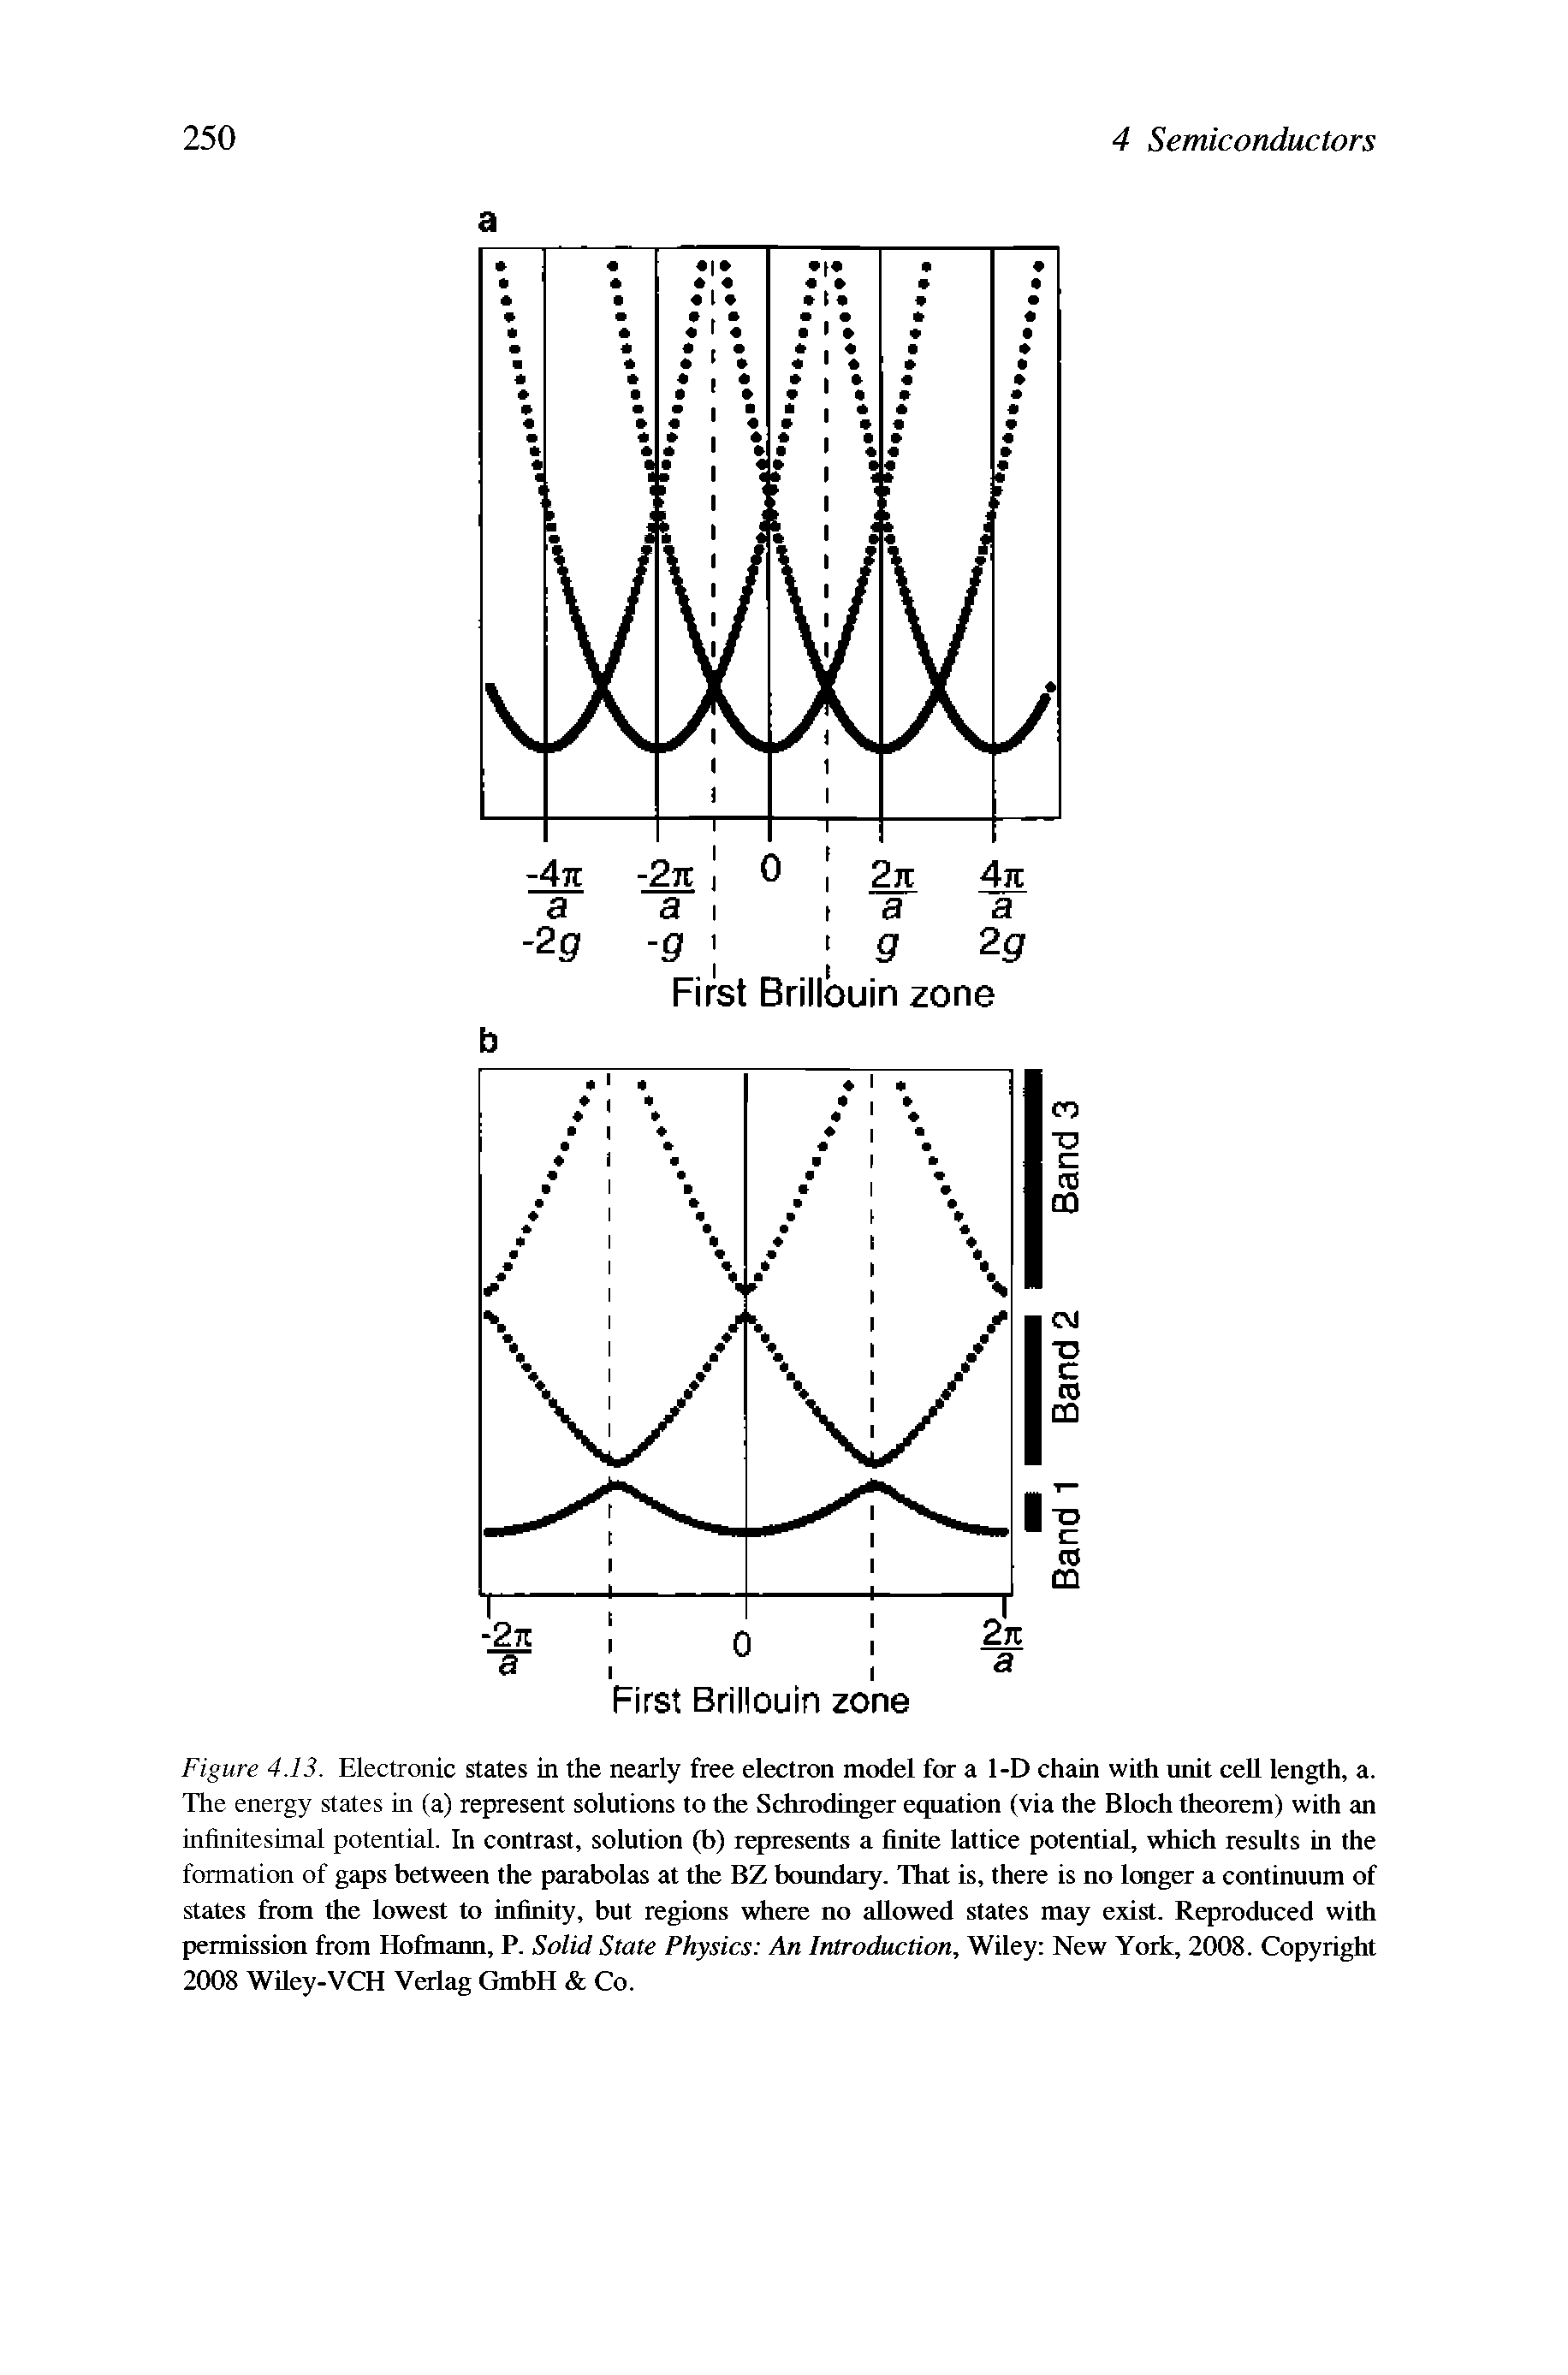 Figure 4.13. Electronic states in the nearly free electron model for a 1-D chain with unit ceU length, a. The energy states in (a) represent solutions to the Schrodinger equation (via the Bloch theorem) with an infinitesimal potential. In contrast, solution (b) represents a finite lattice potential, which results in the formation of gaps between the parabolas at the BZ boundary. That is, there is no longer a continuum of states from the lowest to infinity, but regions where no allowed states may exist. Reproduced with permission from Hofmann, P. Solid State Physics An Introduction, Wiley New York, 2008. Copyright 2008 Wiley-VCH Verlag GmbH Co.